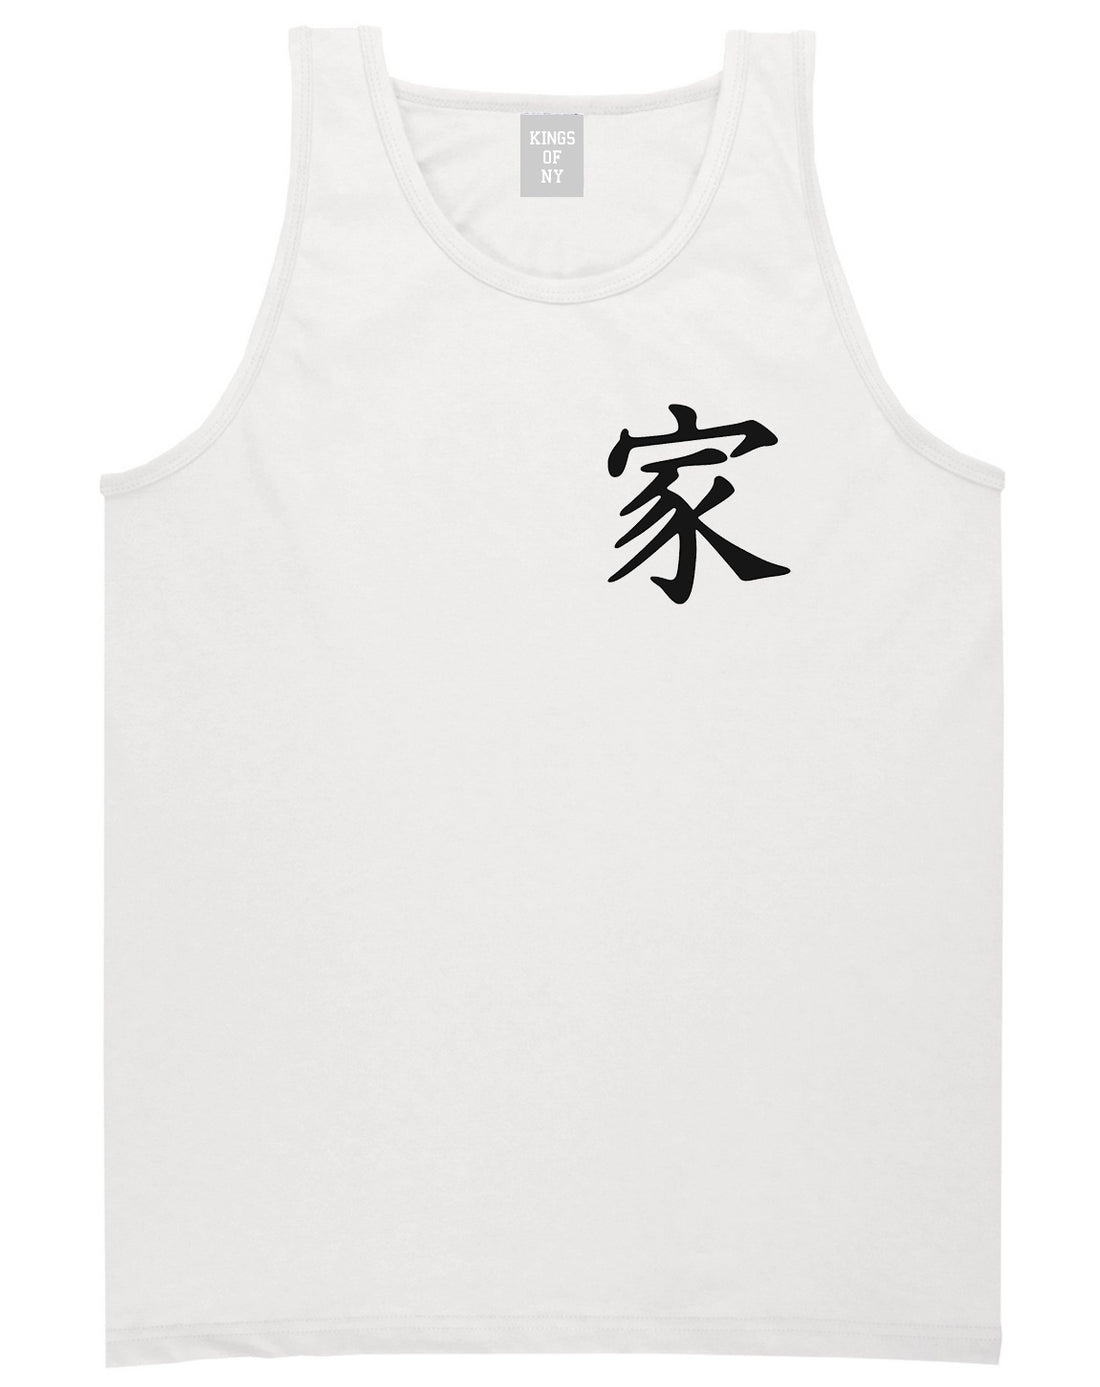 Chinese Symbol For Family Chest Mens White Tank Top Shirt by KINGS OF NY